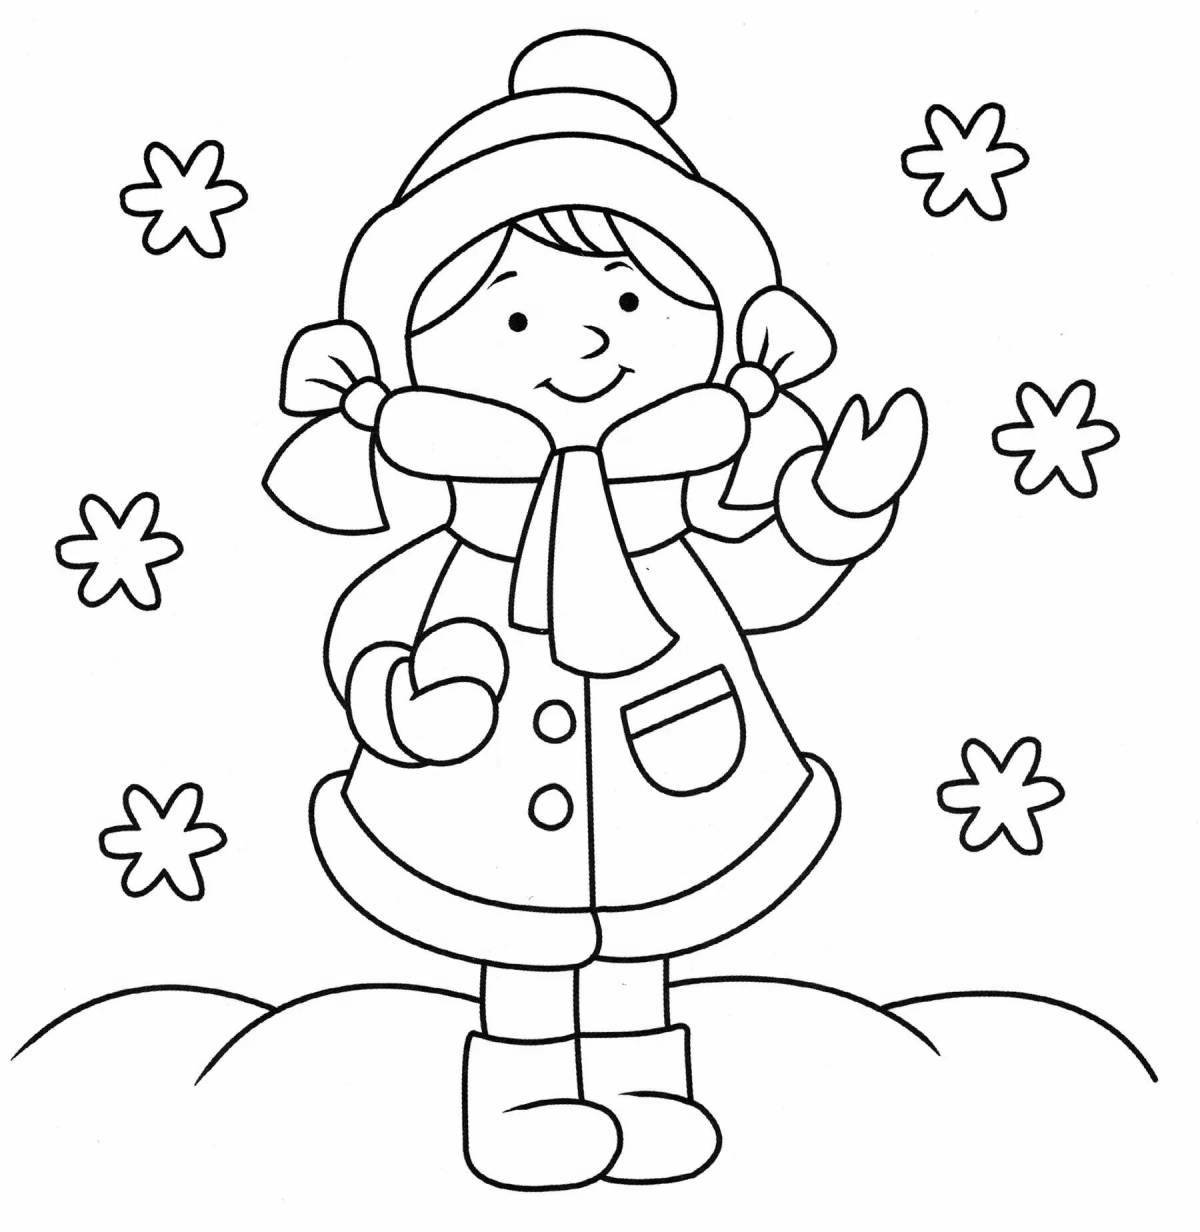 Live winter coloring for children 2-3 years old